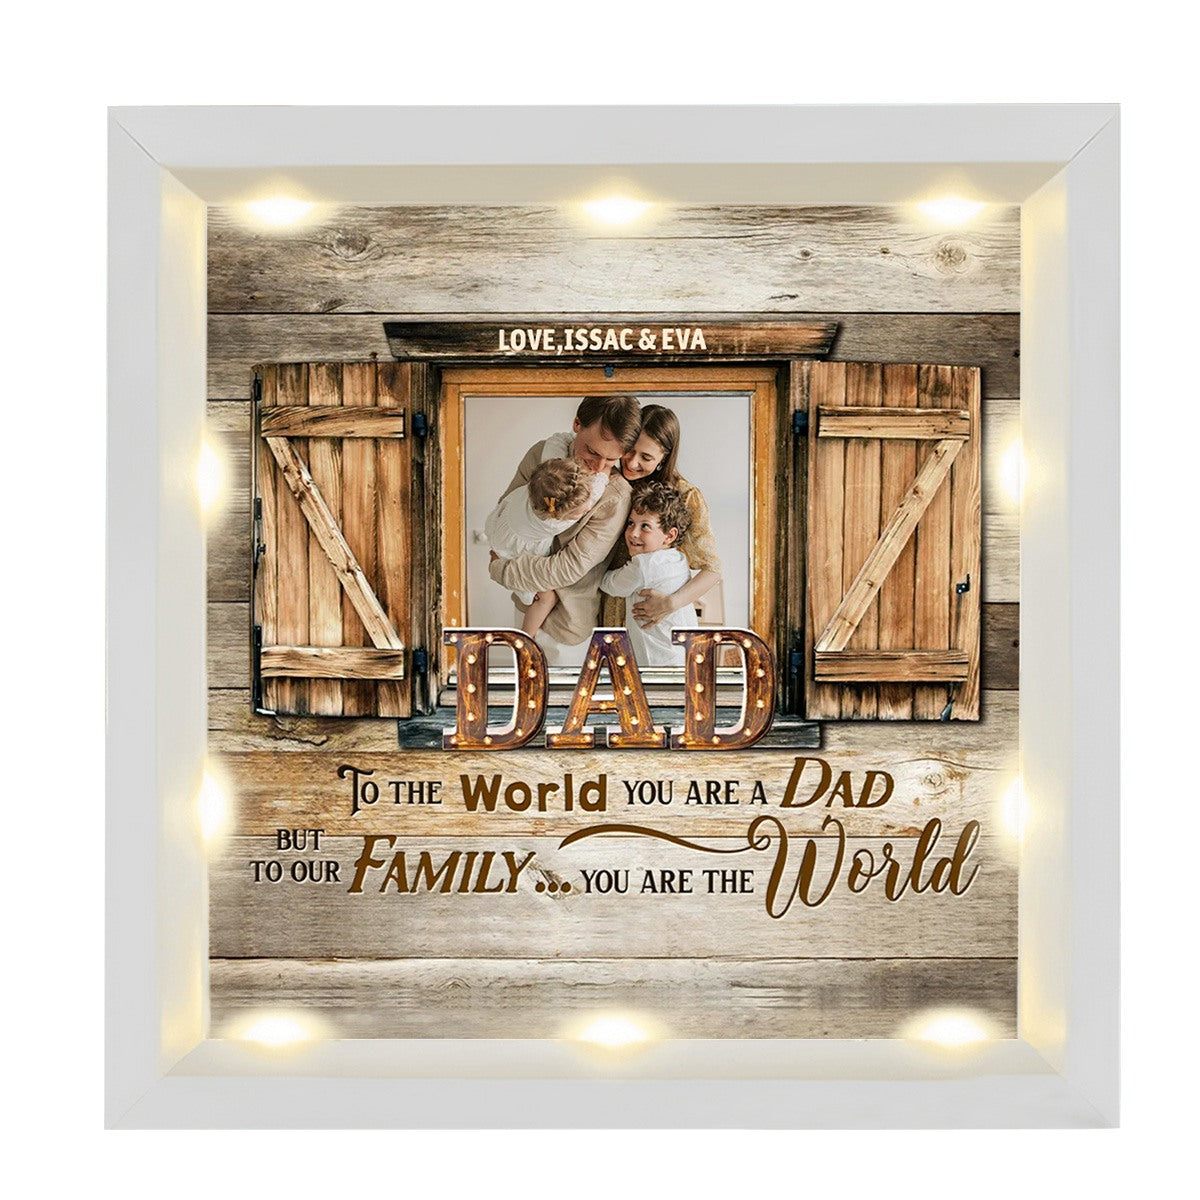 Personalized Light Shadow Box - To Our Family You are the World Father's Day Gift